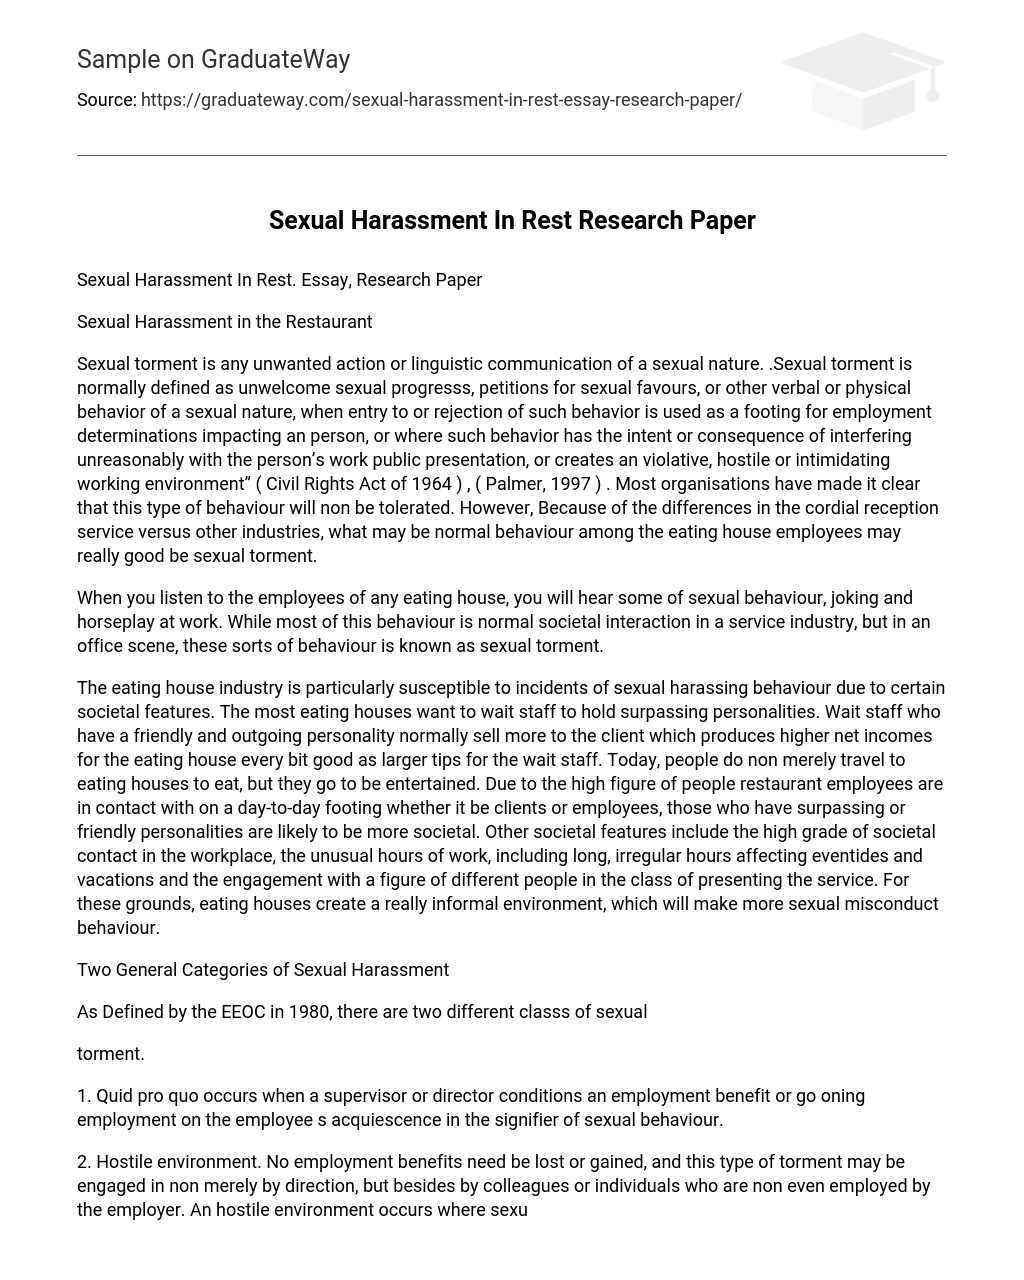 Sexual Harassment In Rest Research Paper